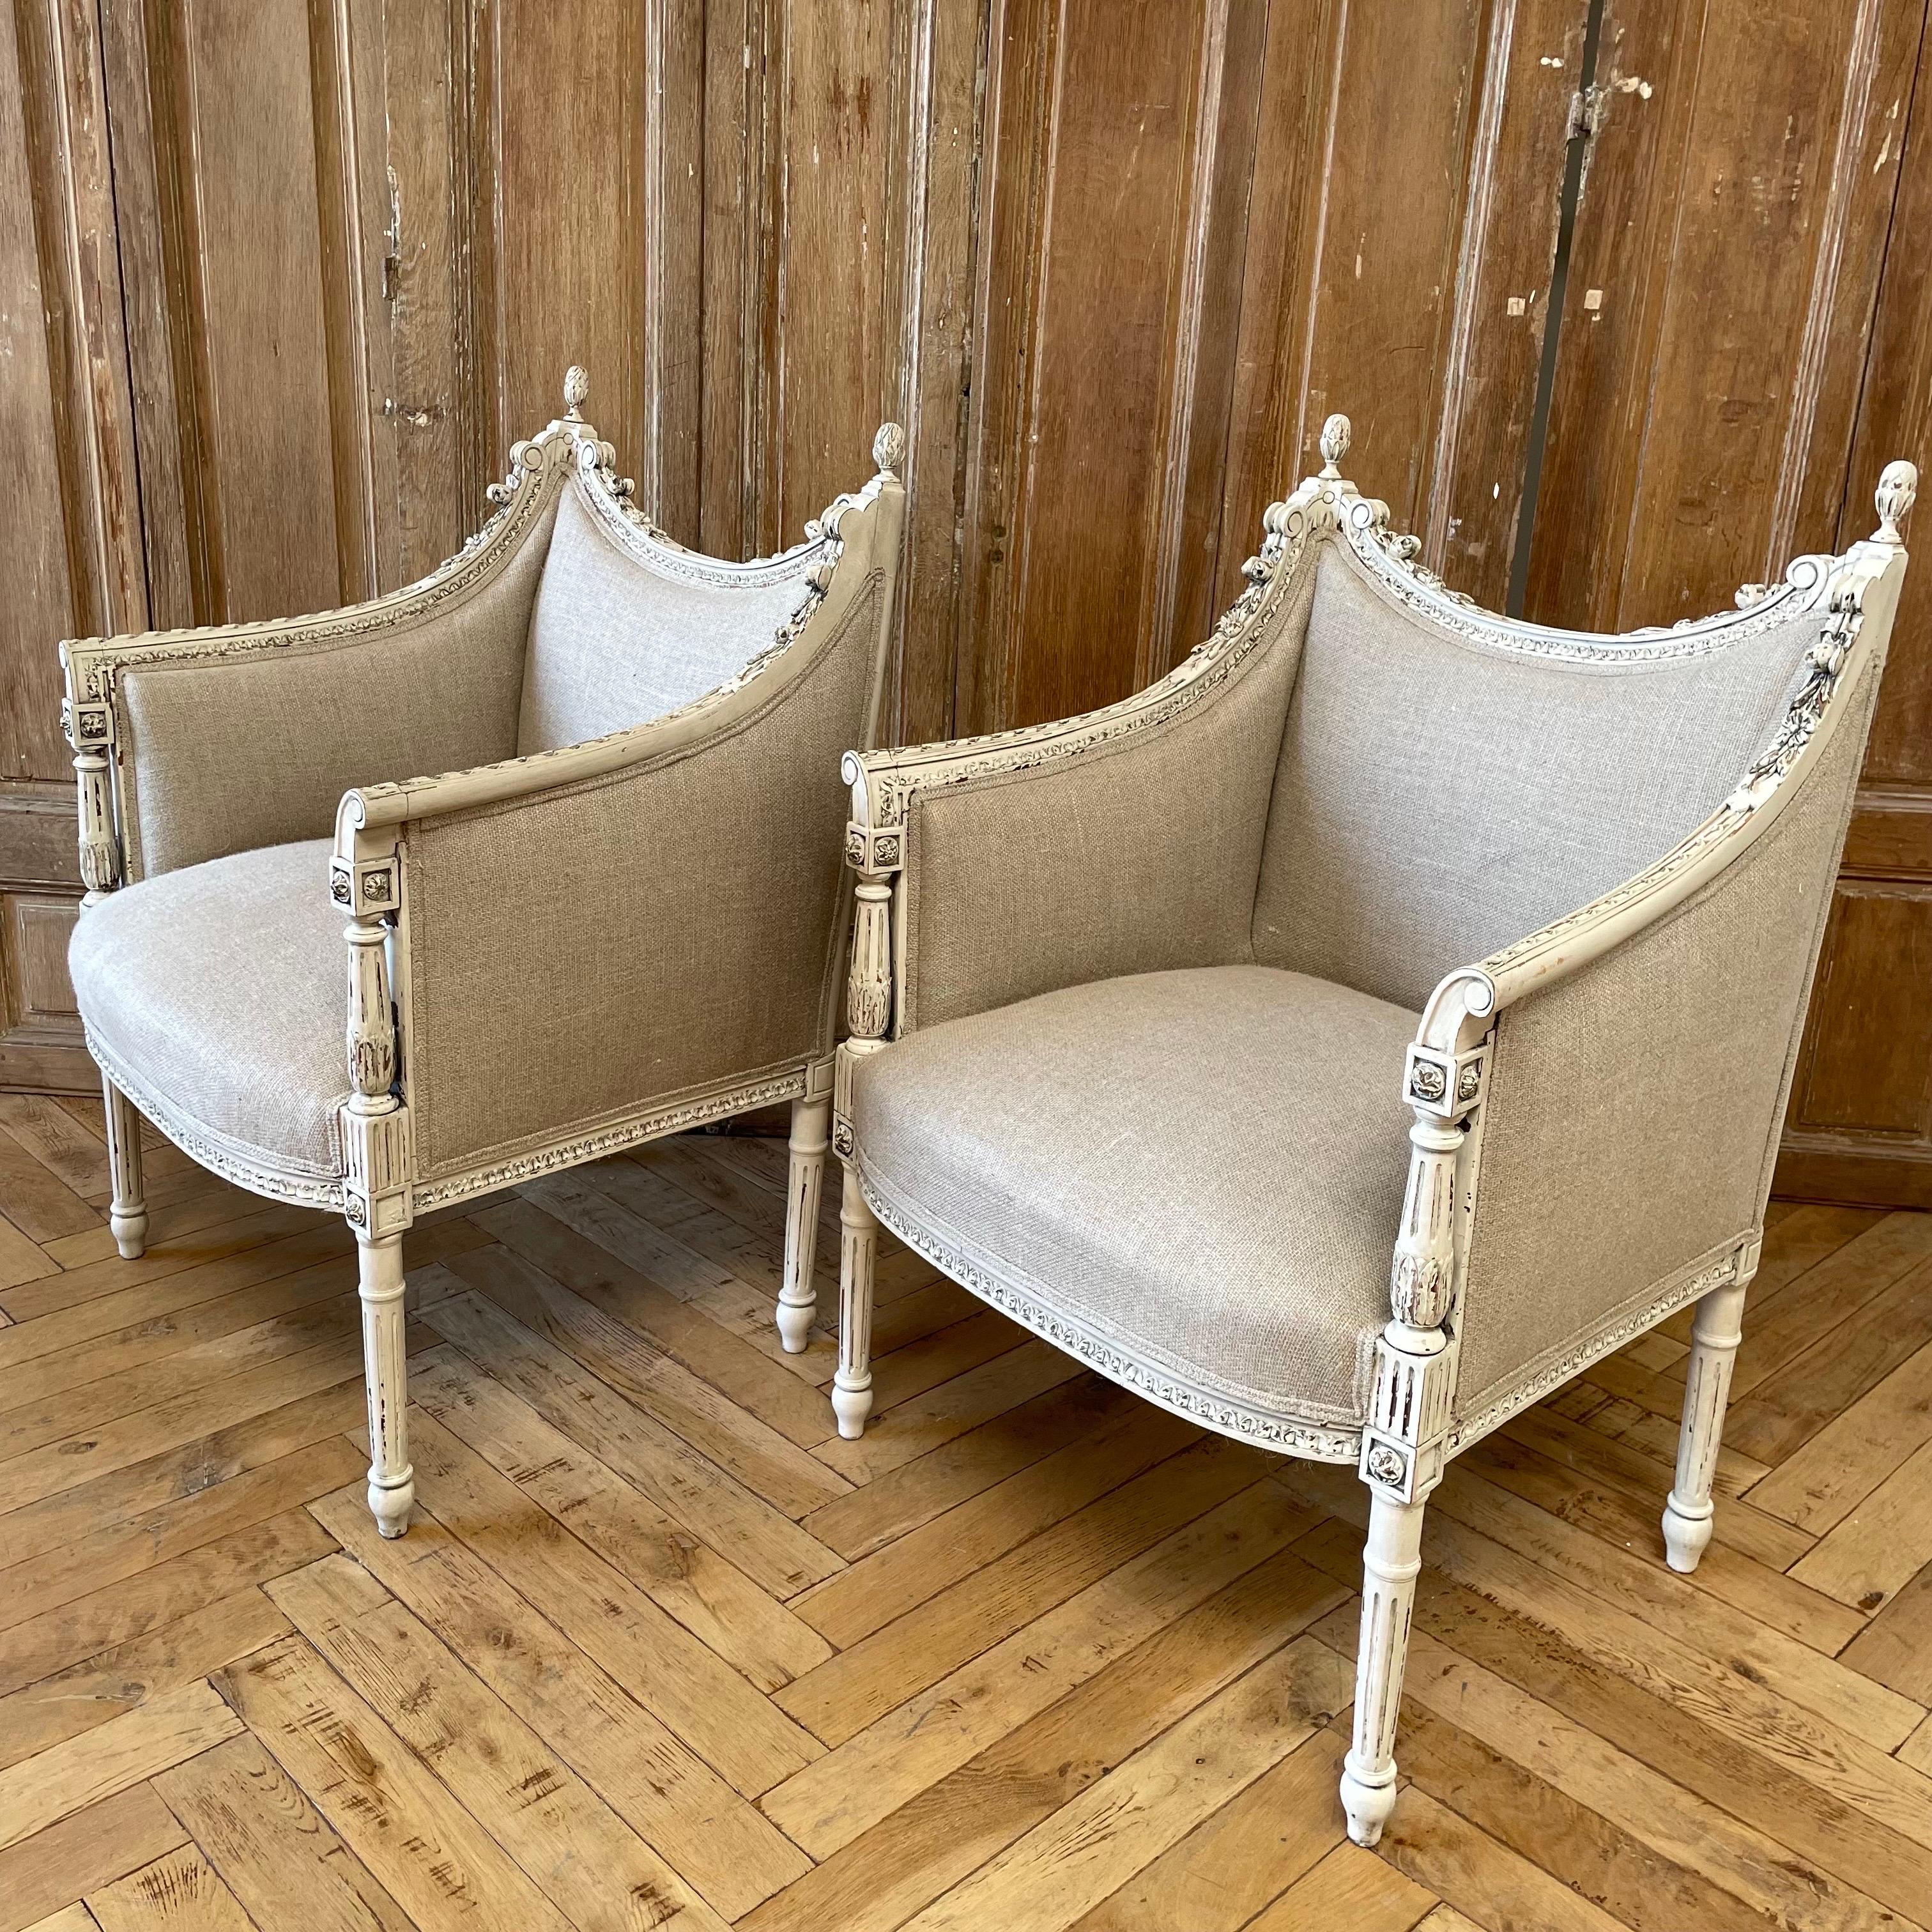 Pair of Antique Louis XVI Style Chairs Upholstered in Irish Natural Linen For Sale 4